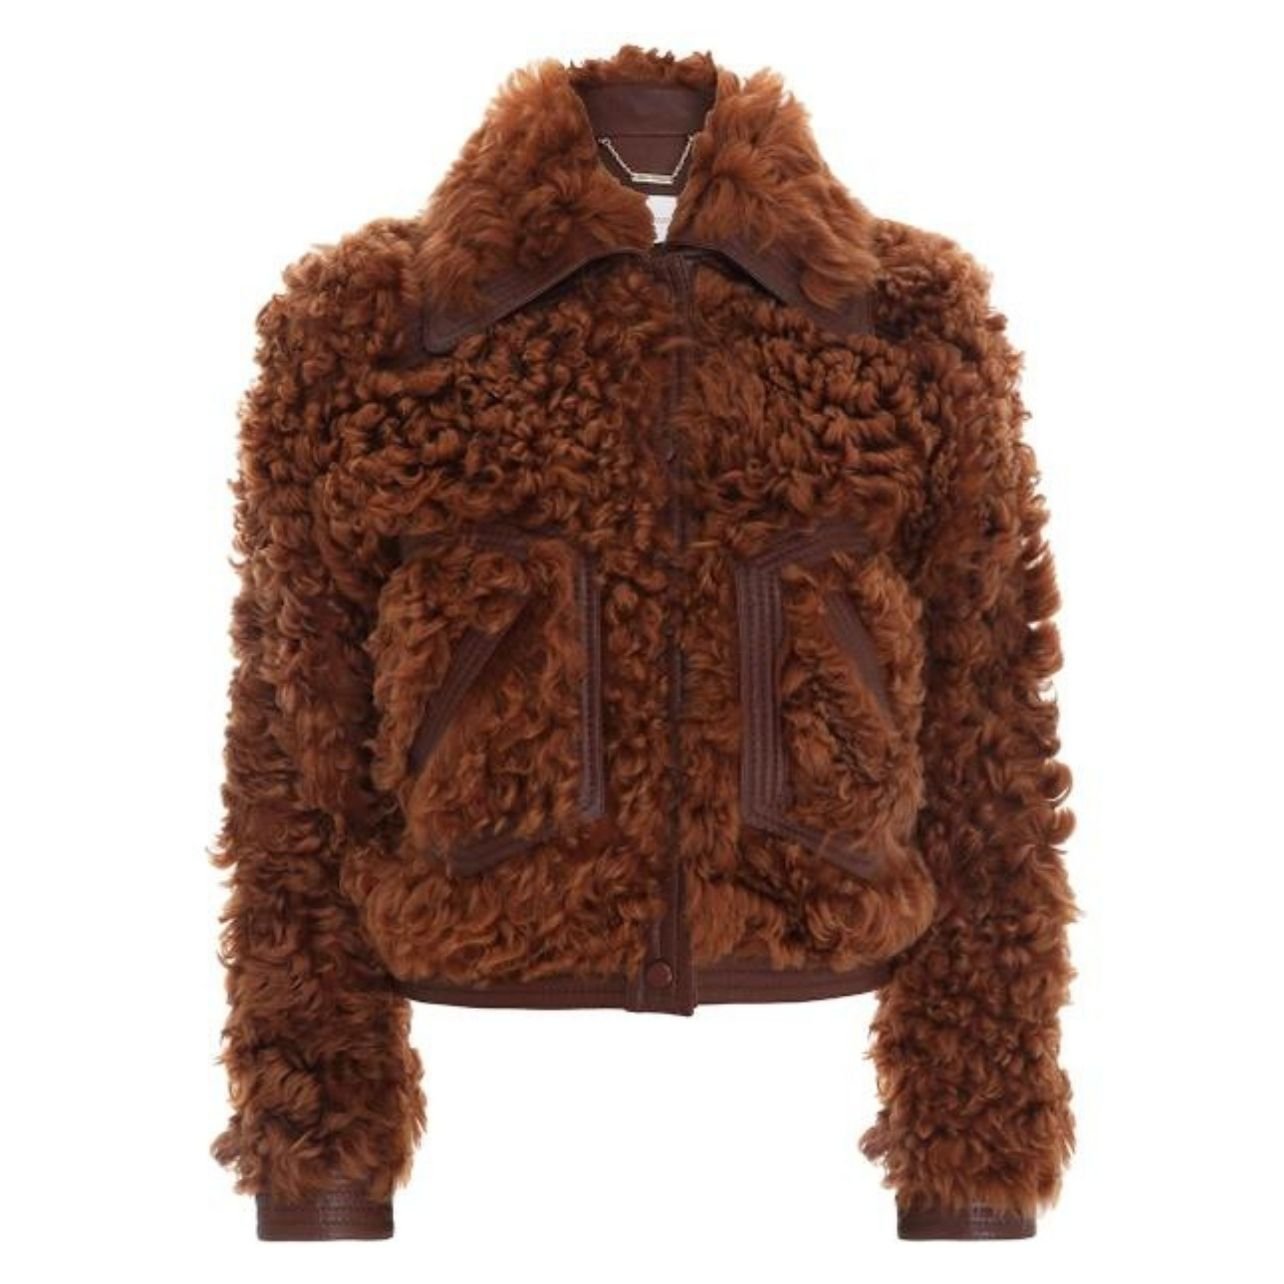 Zimmermann brown shearling collared jacket